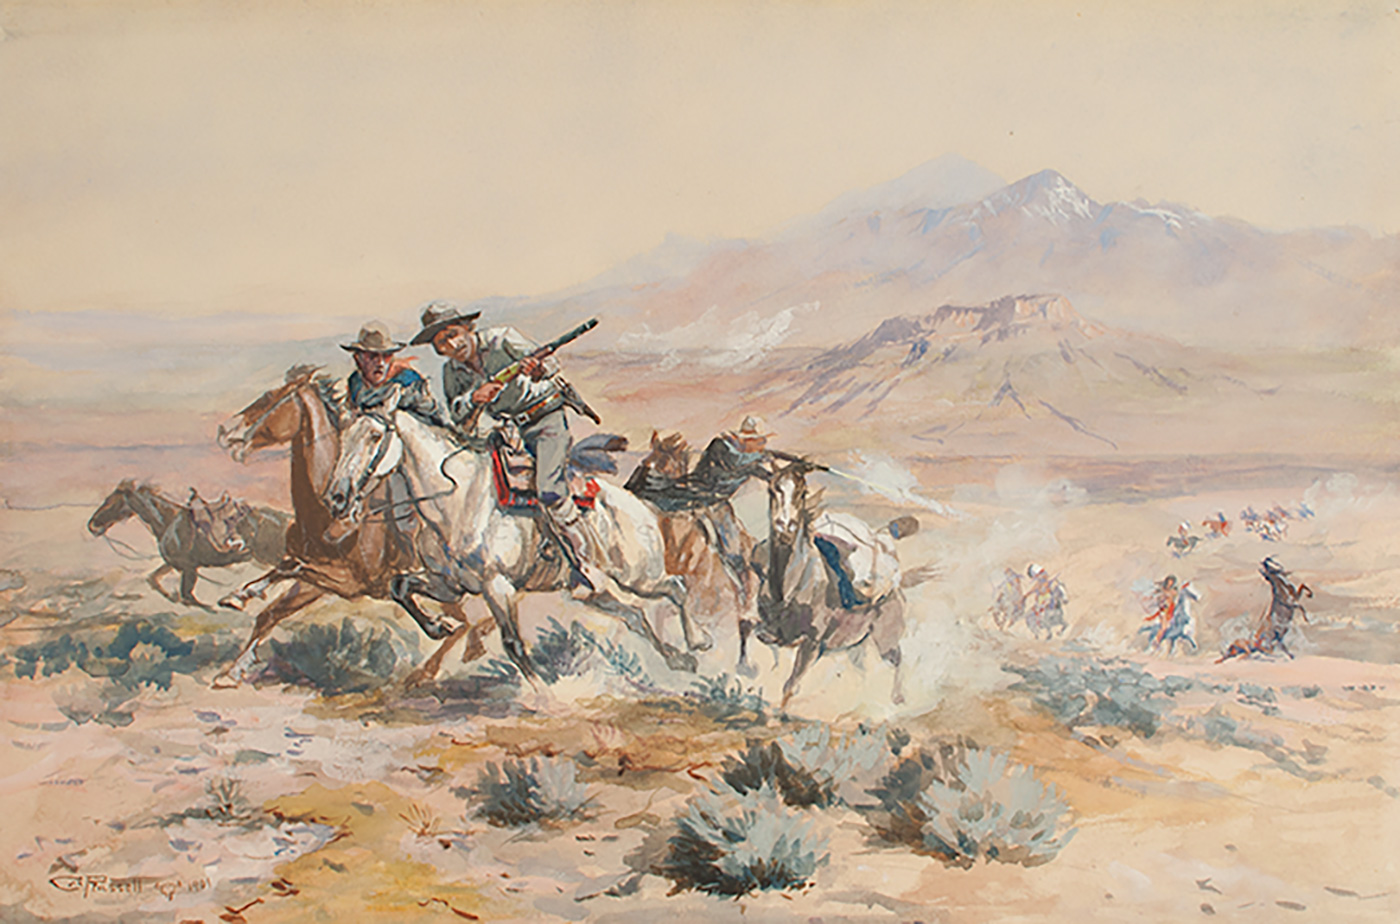 A group of Anglo men on horseback with rifles are being followed by mounted indigenous American men in the far distance.